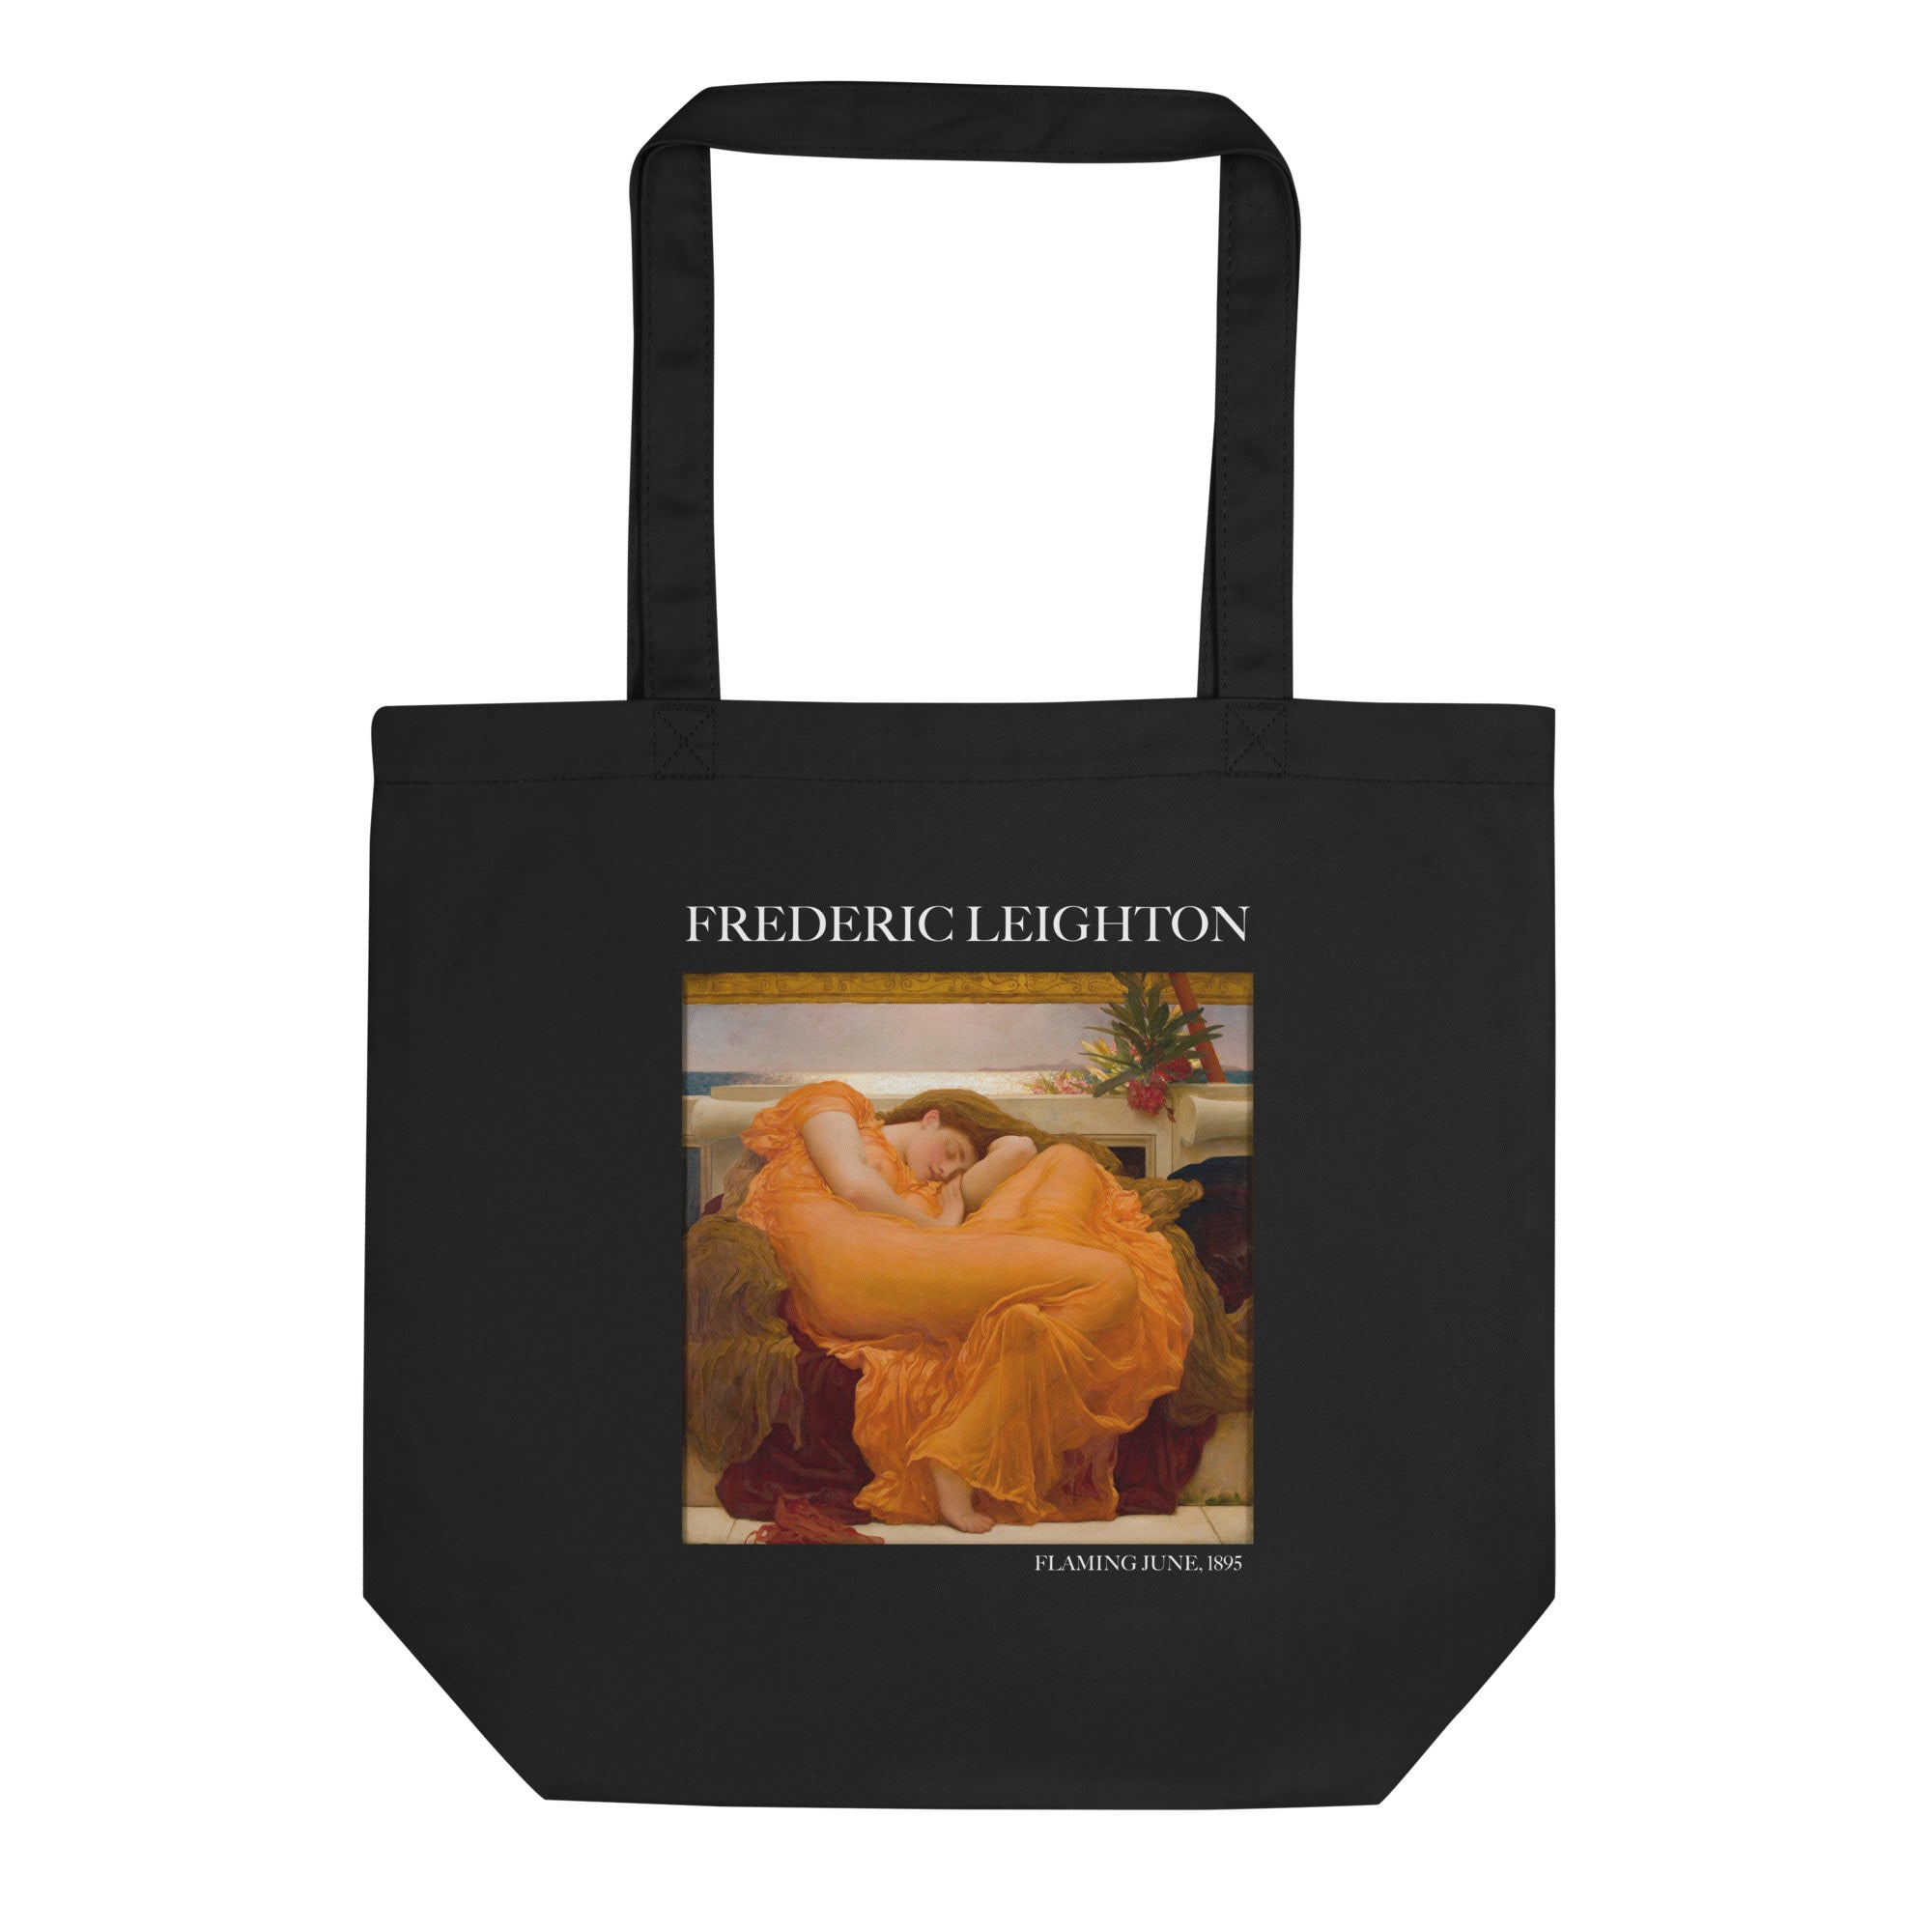 Frederic Leighton 'Flaming June' Famous Painting Totebag | Eco Friendly Art Tote Bag